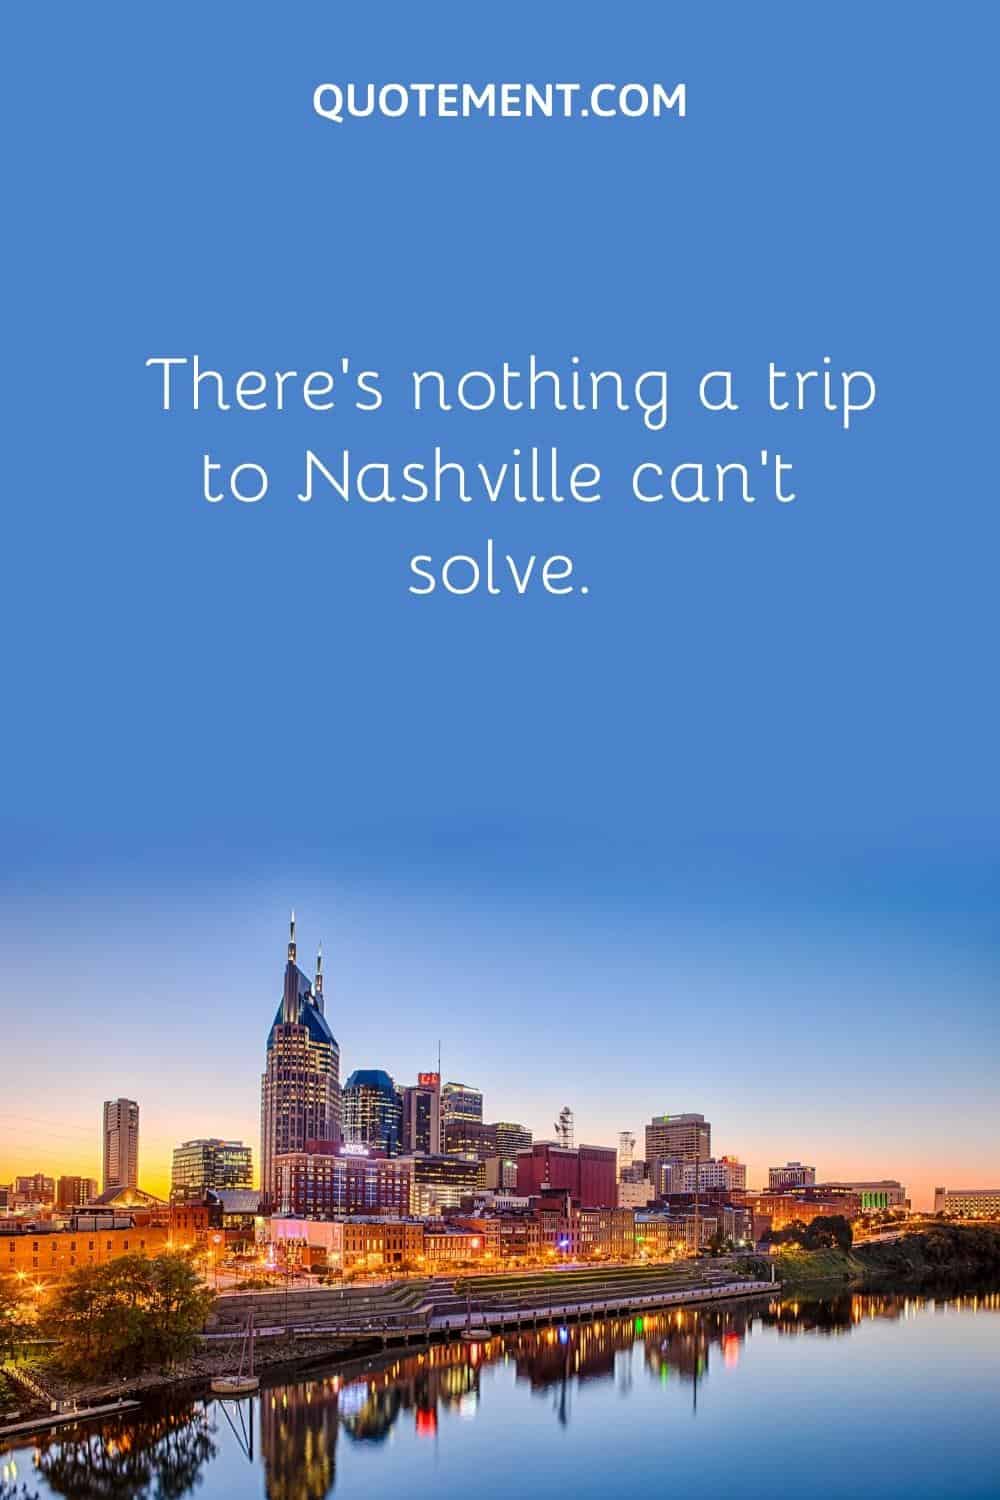 There’s nothing a trip to Nashville can’t solve.